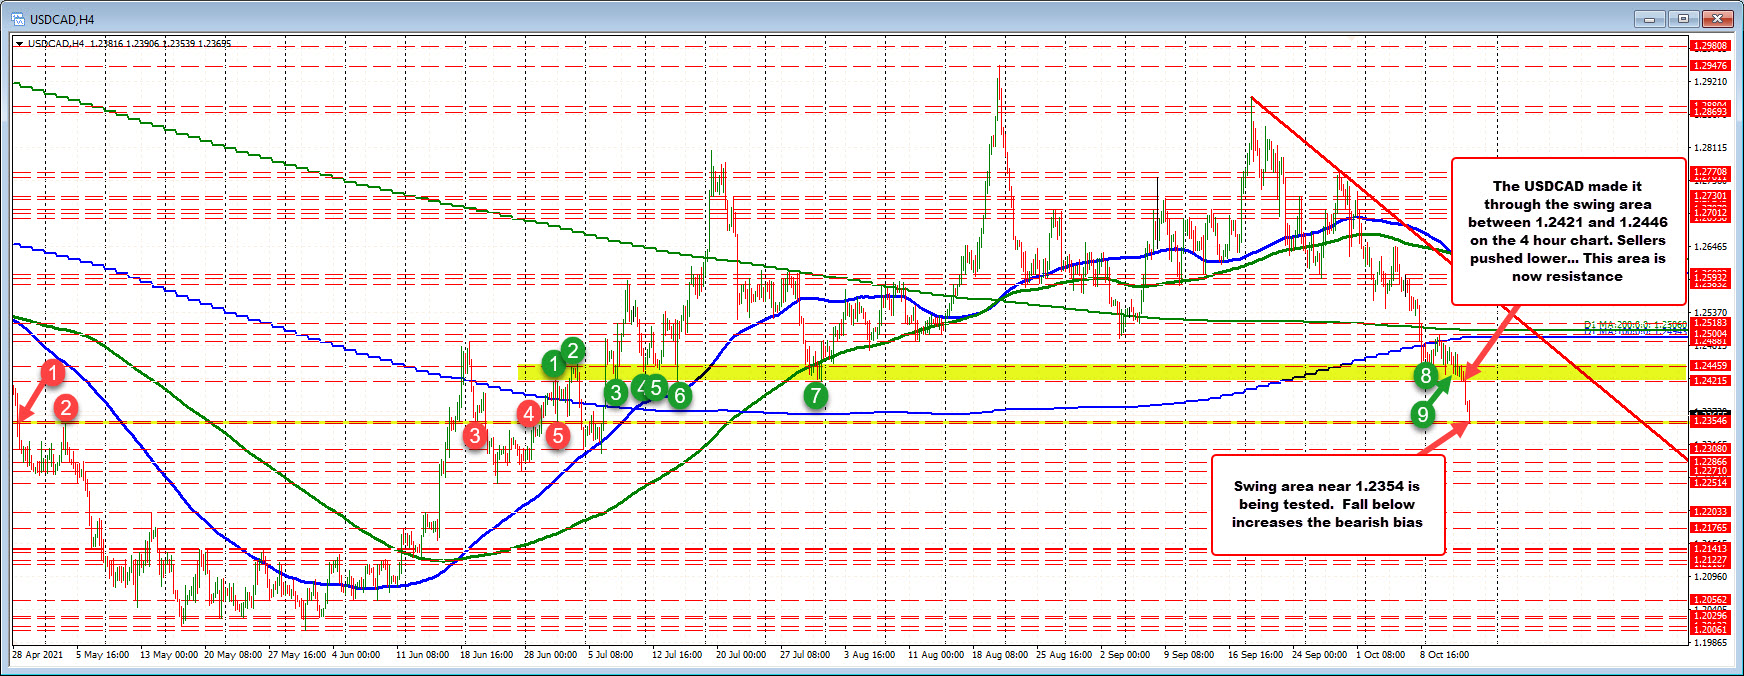 Swing area between 1.24215 and 1.24459 held yesterday, but not today.